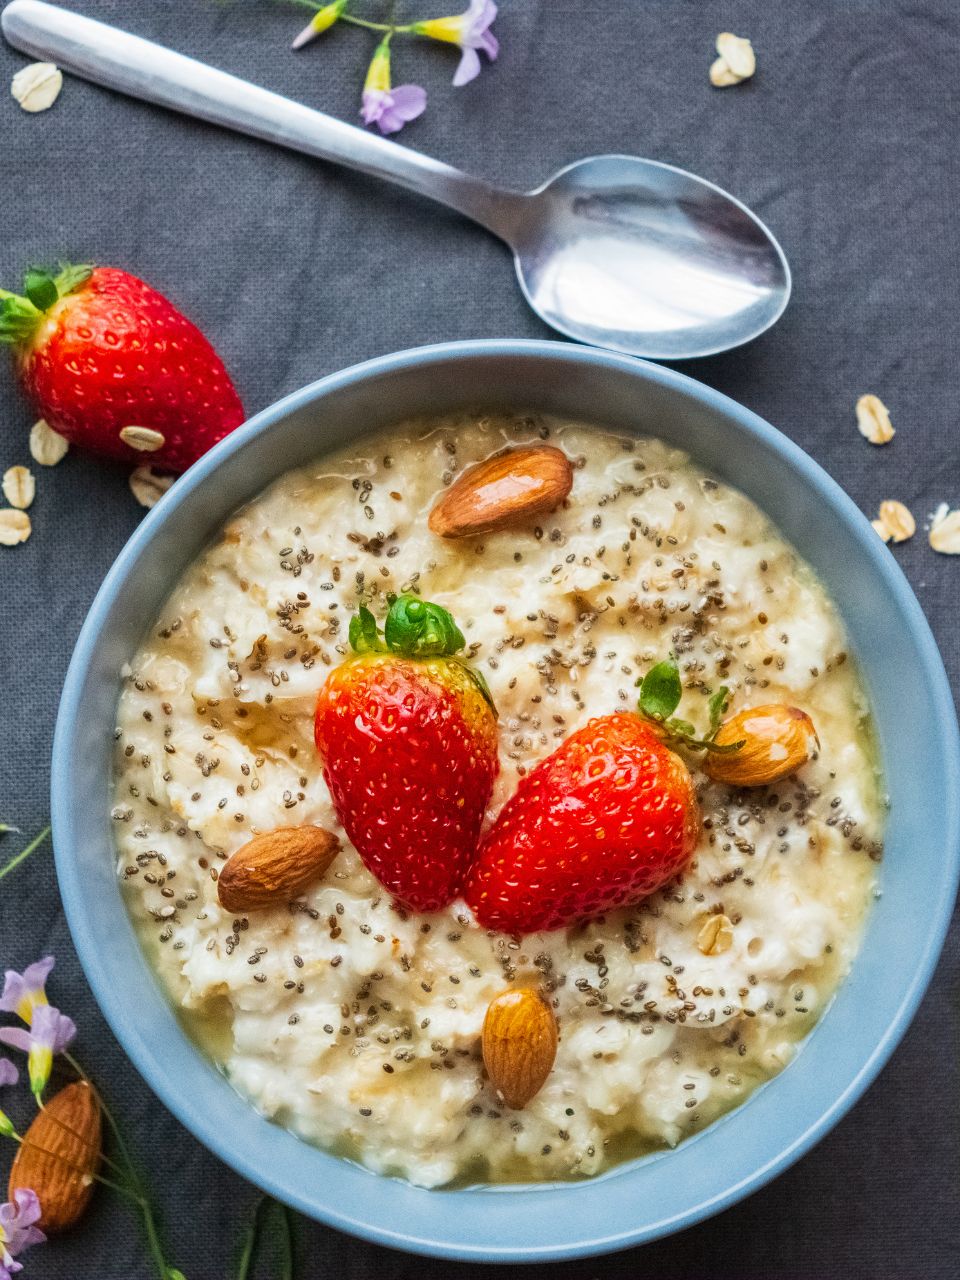 Oats may not be as healthy as you think